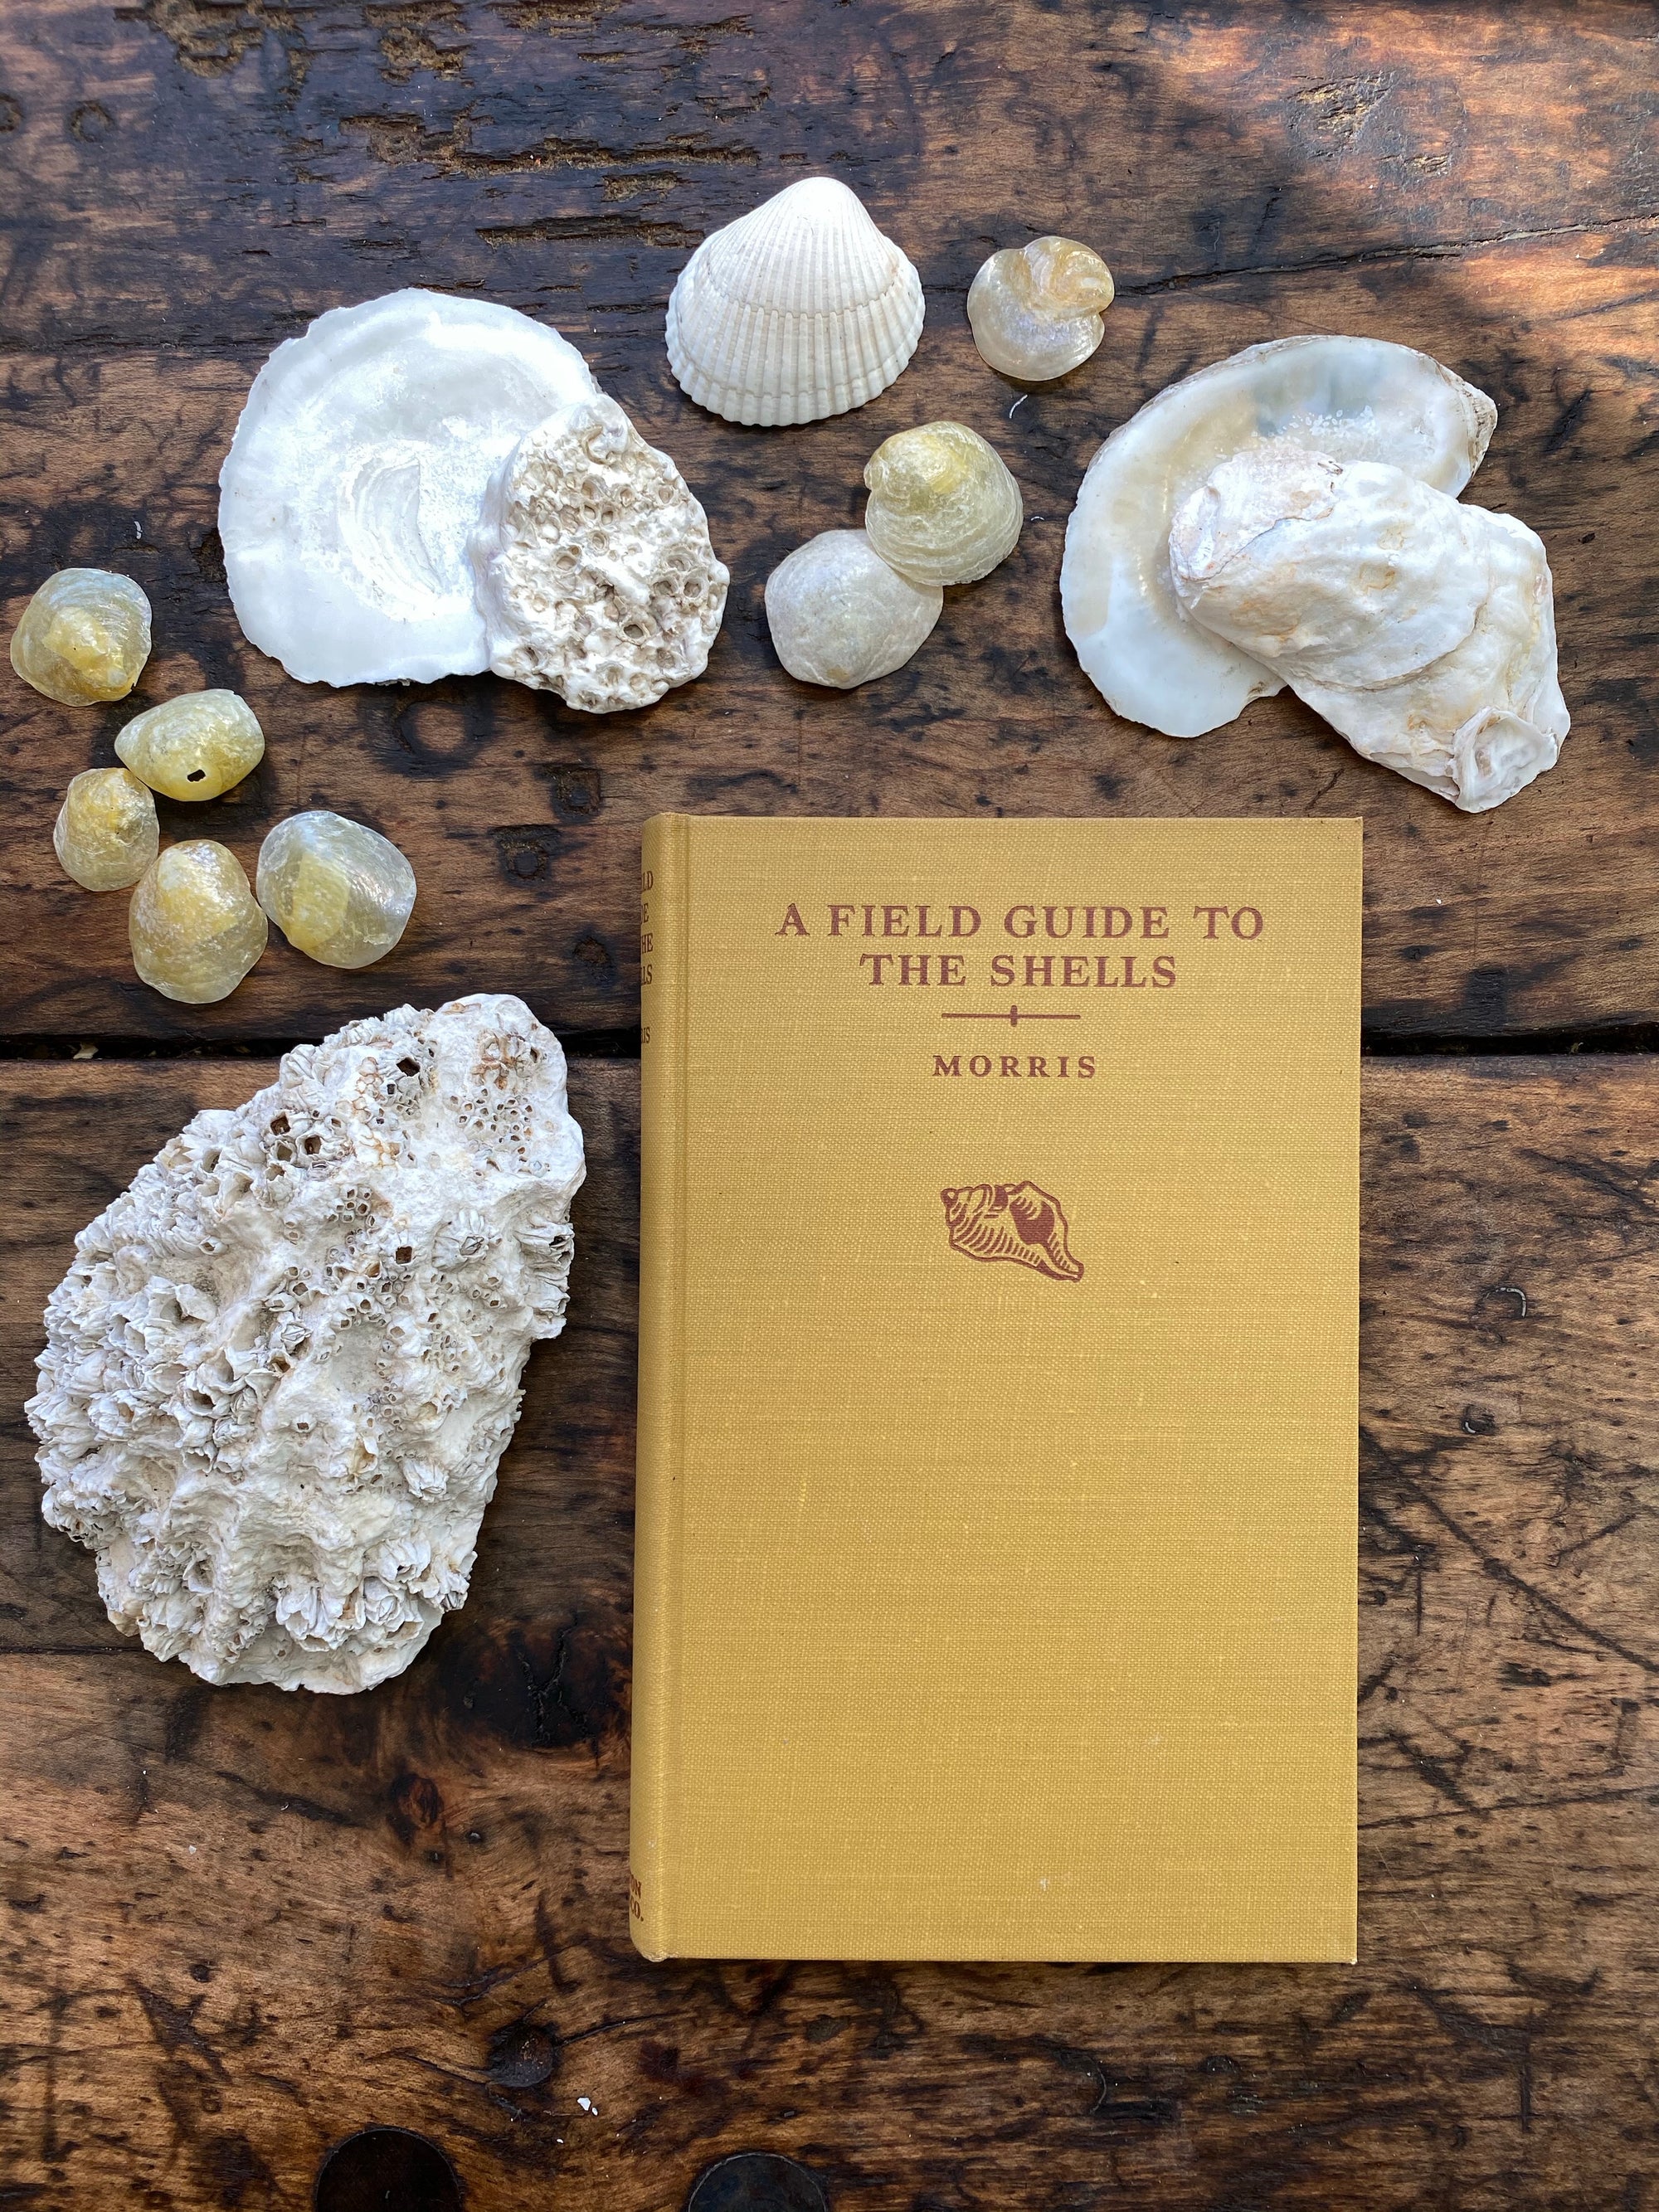 1958 Field Guide to the Shells